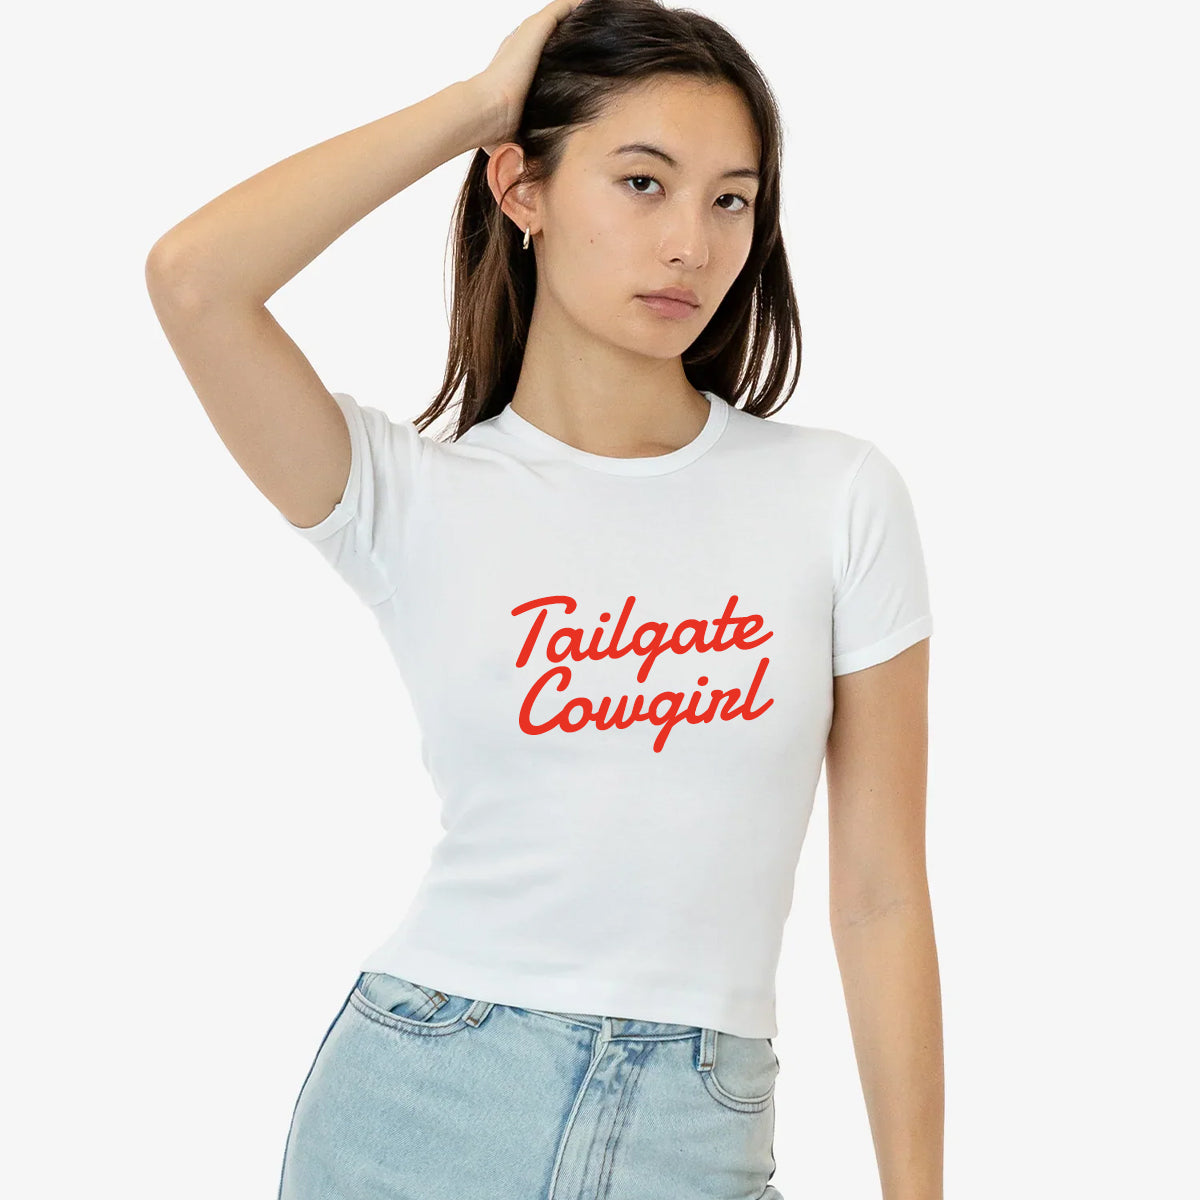 Tailgate Cowgirl Baby Tee